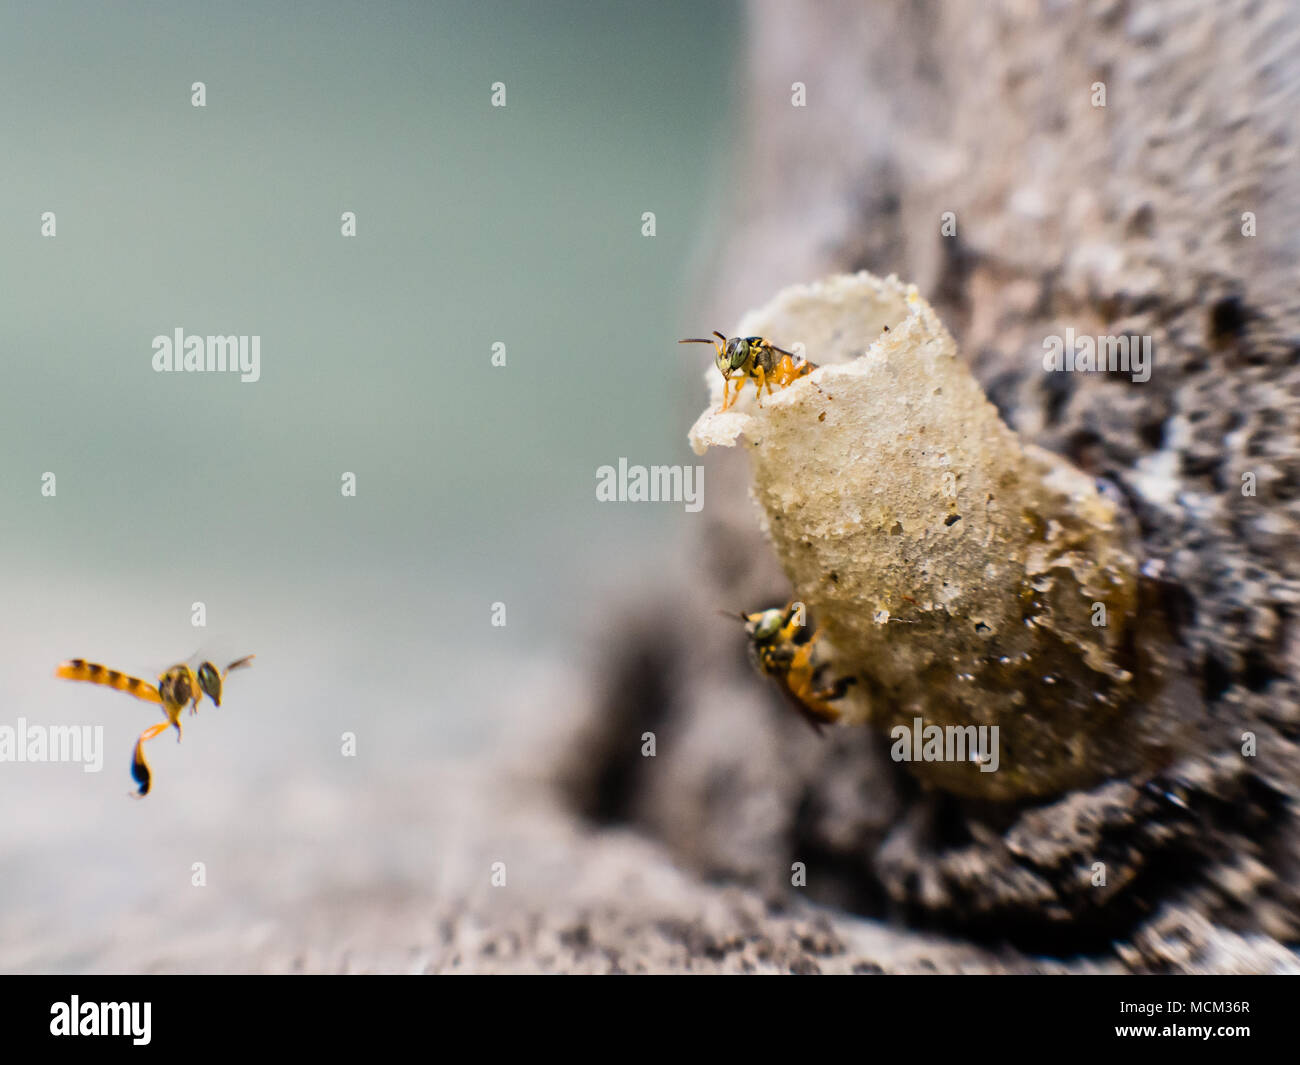 Marco shot of small specie of innocuous bees, Guajira, Colombia Stock Photo